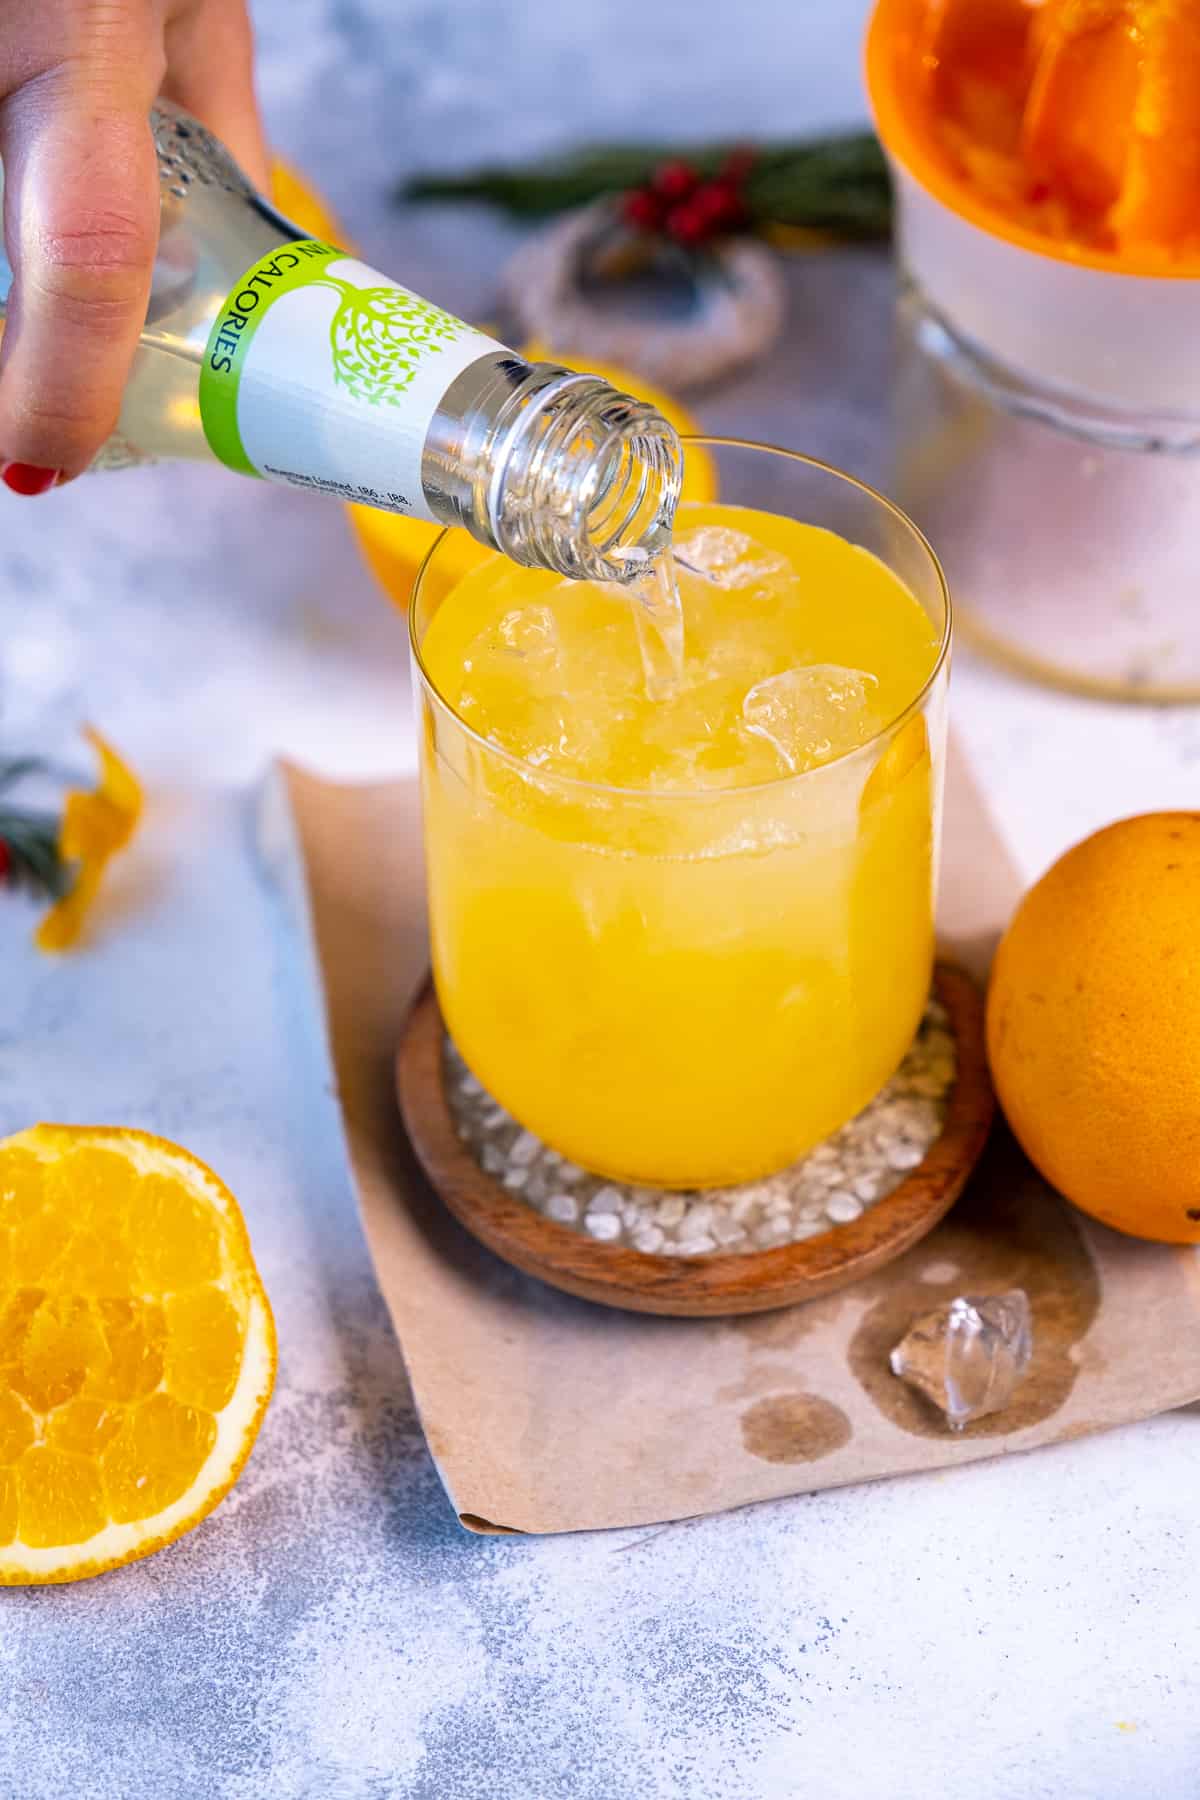 A hand pouring lime soda over vodka orange cocktail.